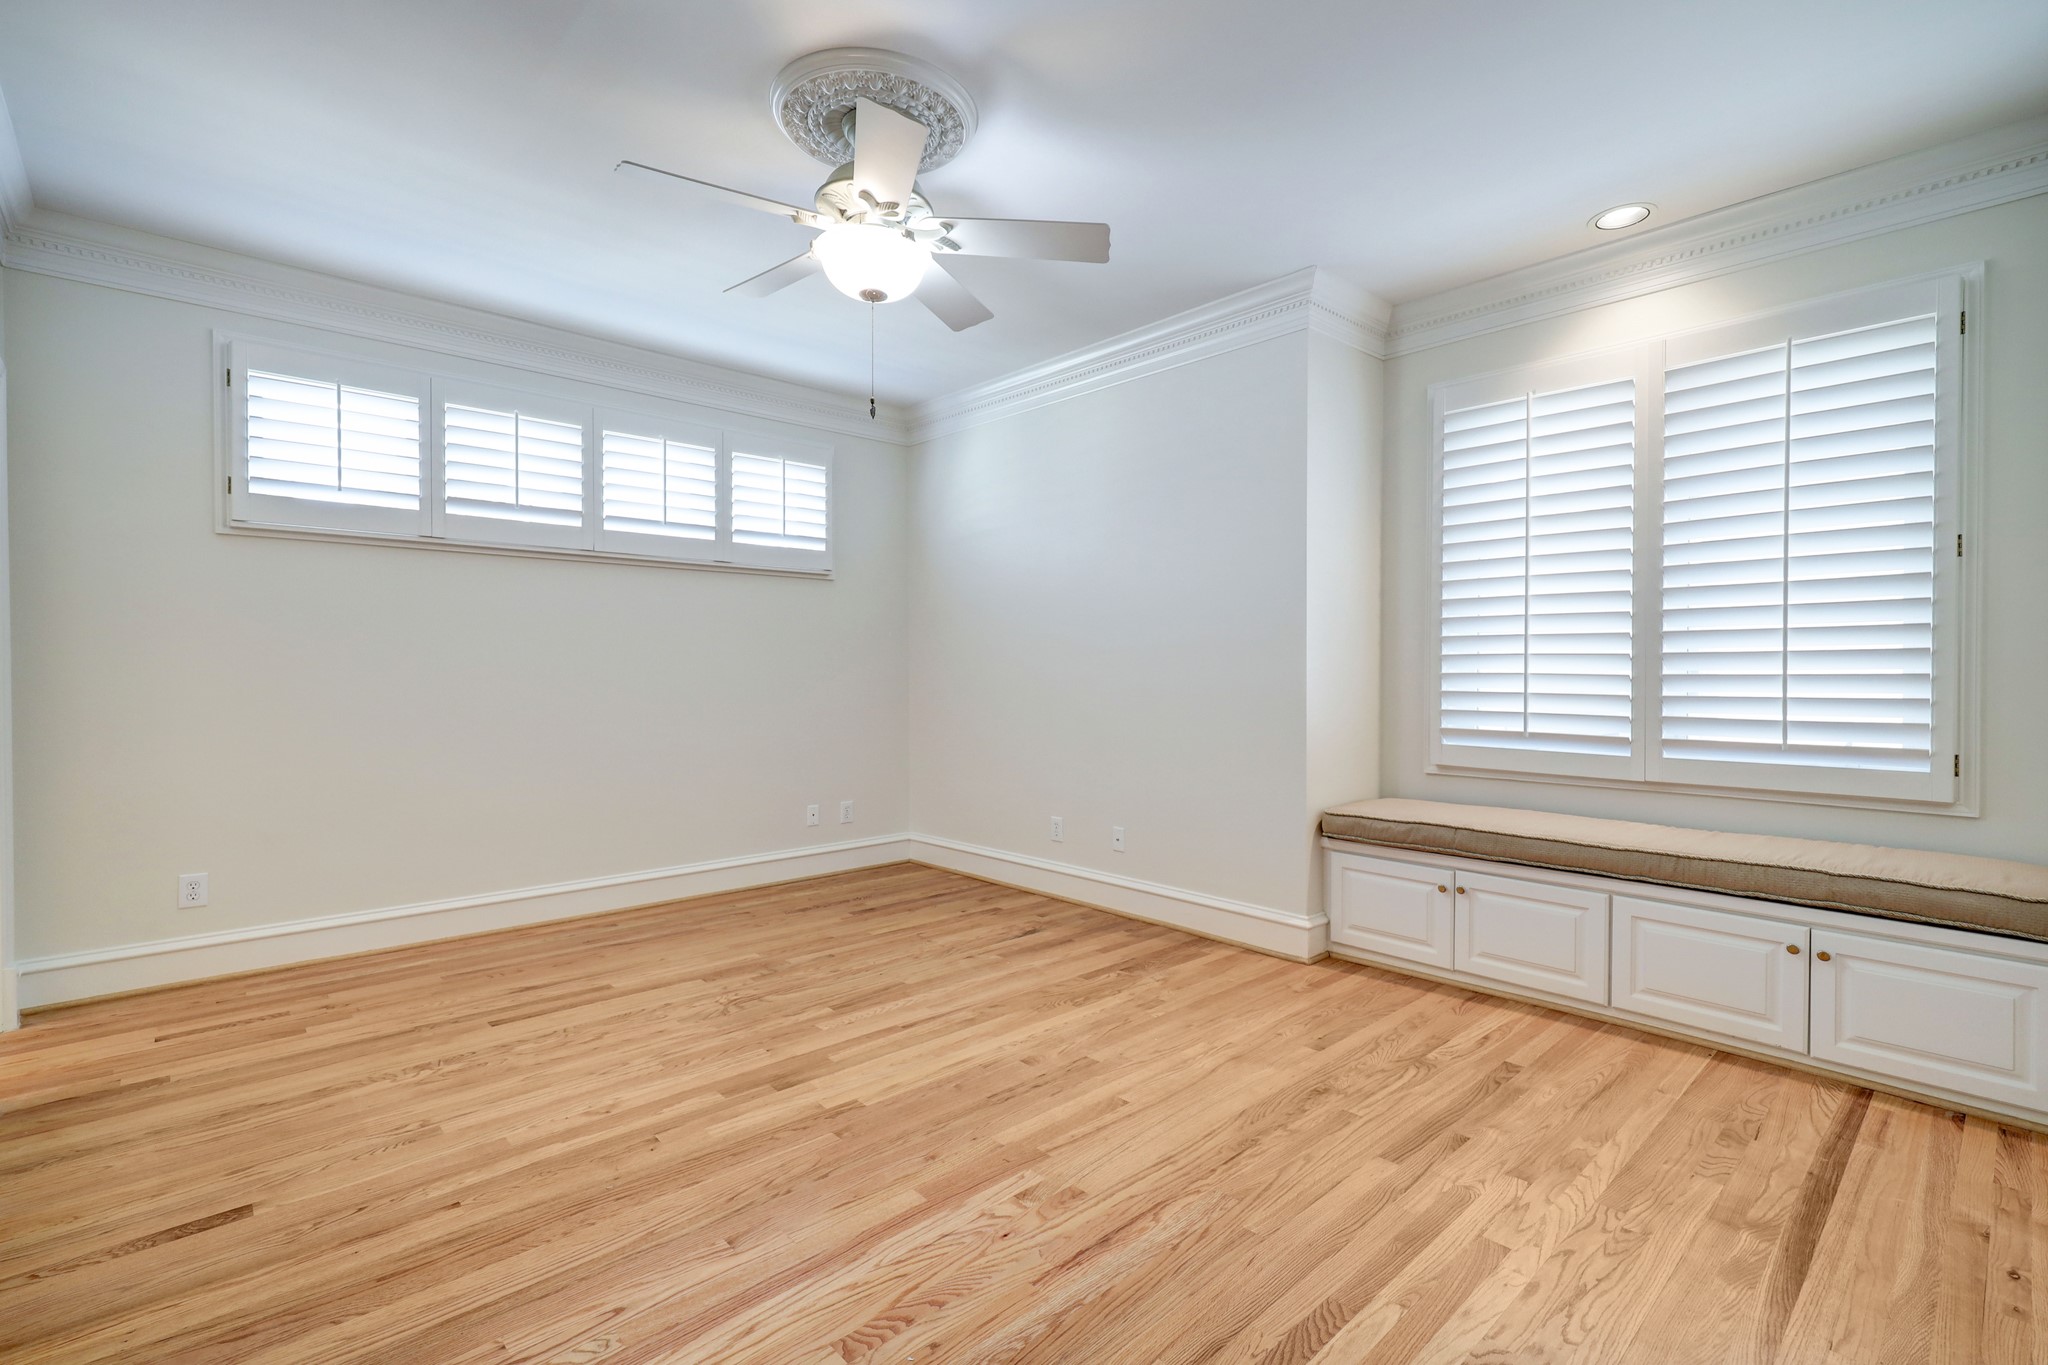 Across the hall from Bedroom 3 is this, Bedroom 4.  Much like the other secondary bedrooms, it features the hardwood flooring, great closet space, plantation shutters, and pretty millwork.  This room's specialty is it's cozy window seating with storage below.